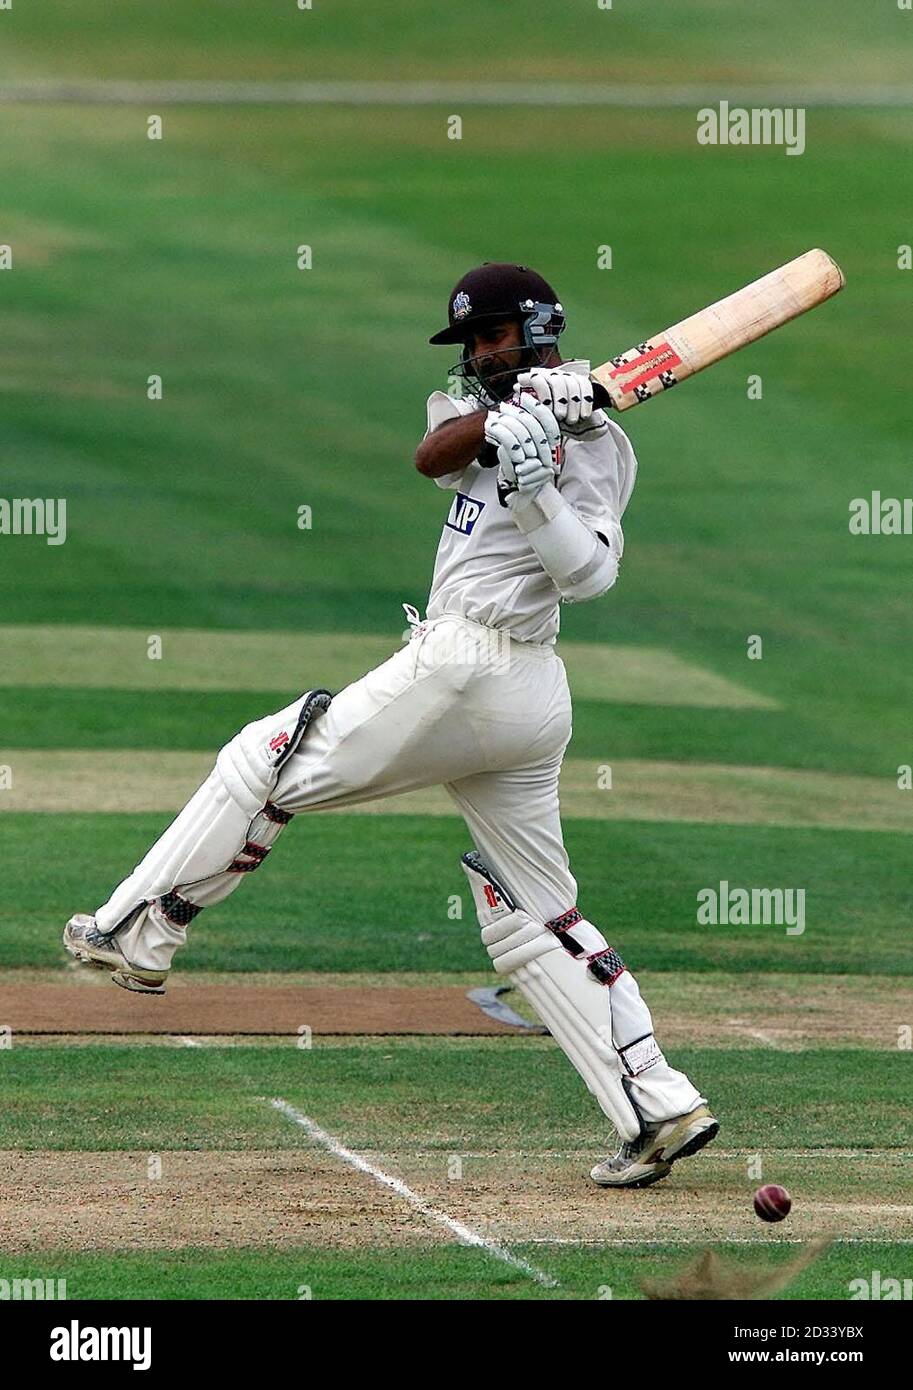 Surrey batsman Nadeem Shahid hooks a delivery from Warwickshire's Mohammad Sheikh on his way to completing his half century during the Frizzell County Championship match at Edgbaston, Birmingham. Stock Photo